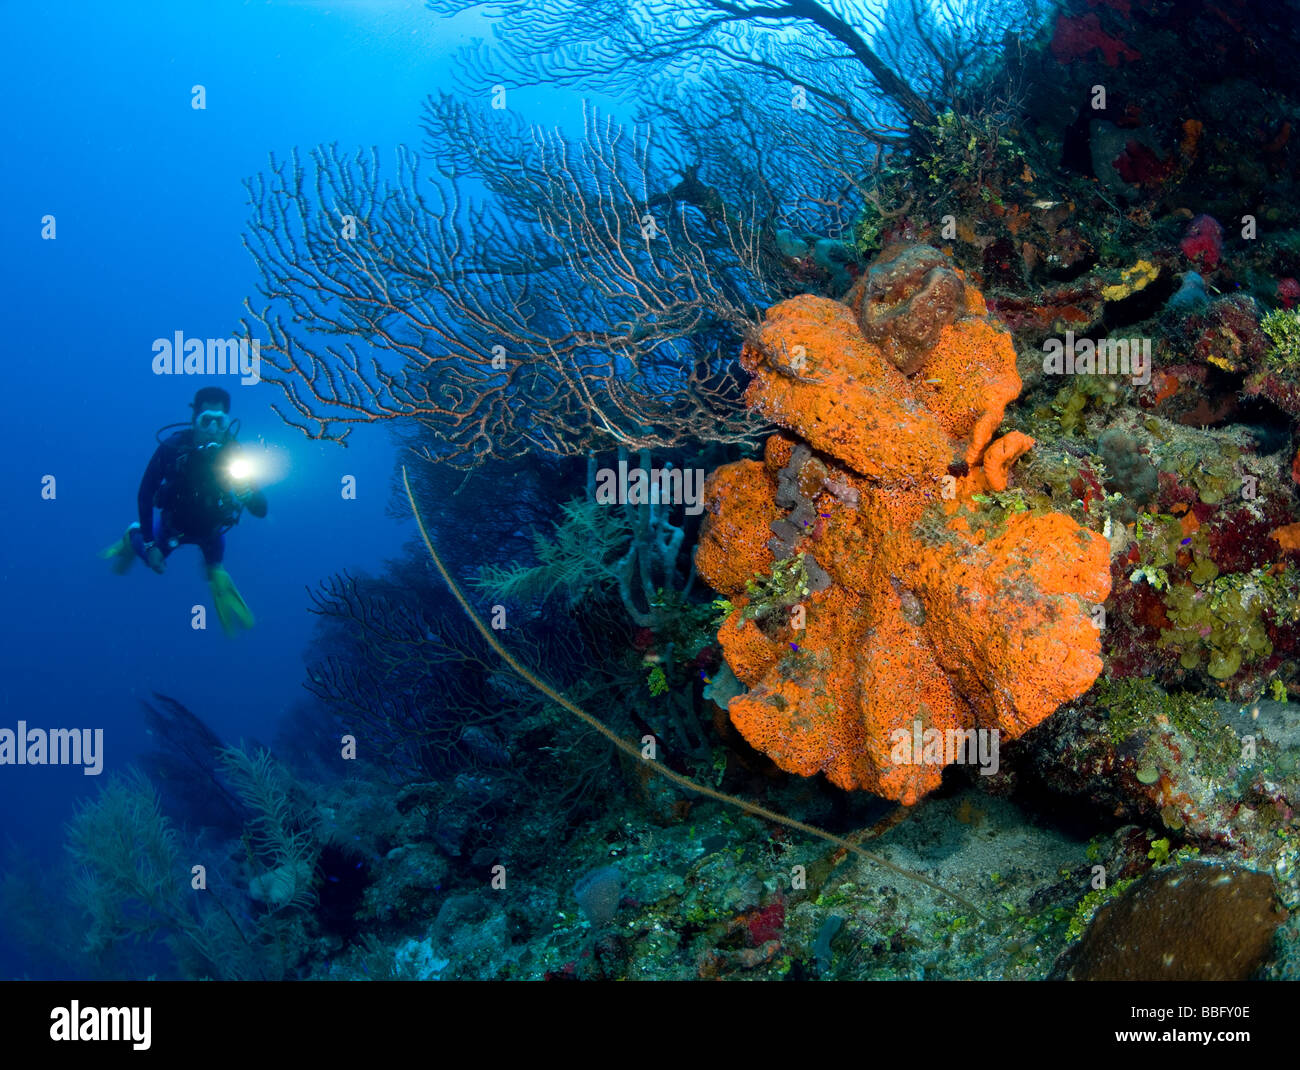 Coral reef scene with diver. Stock Photo